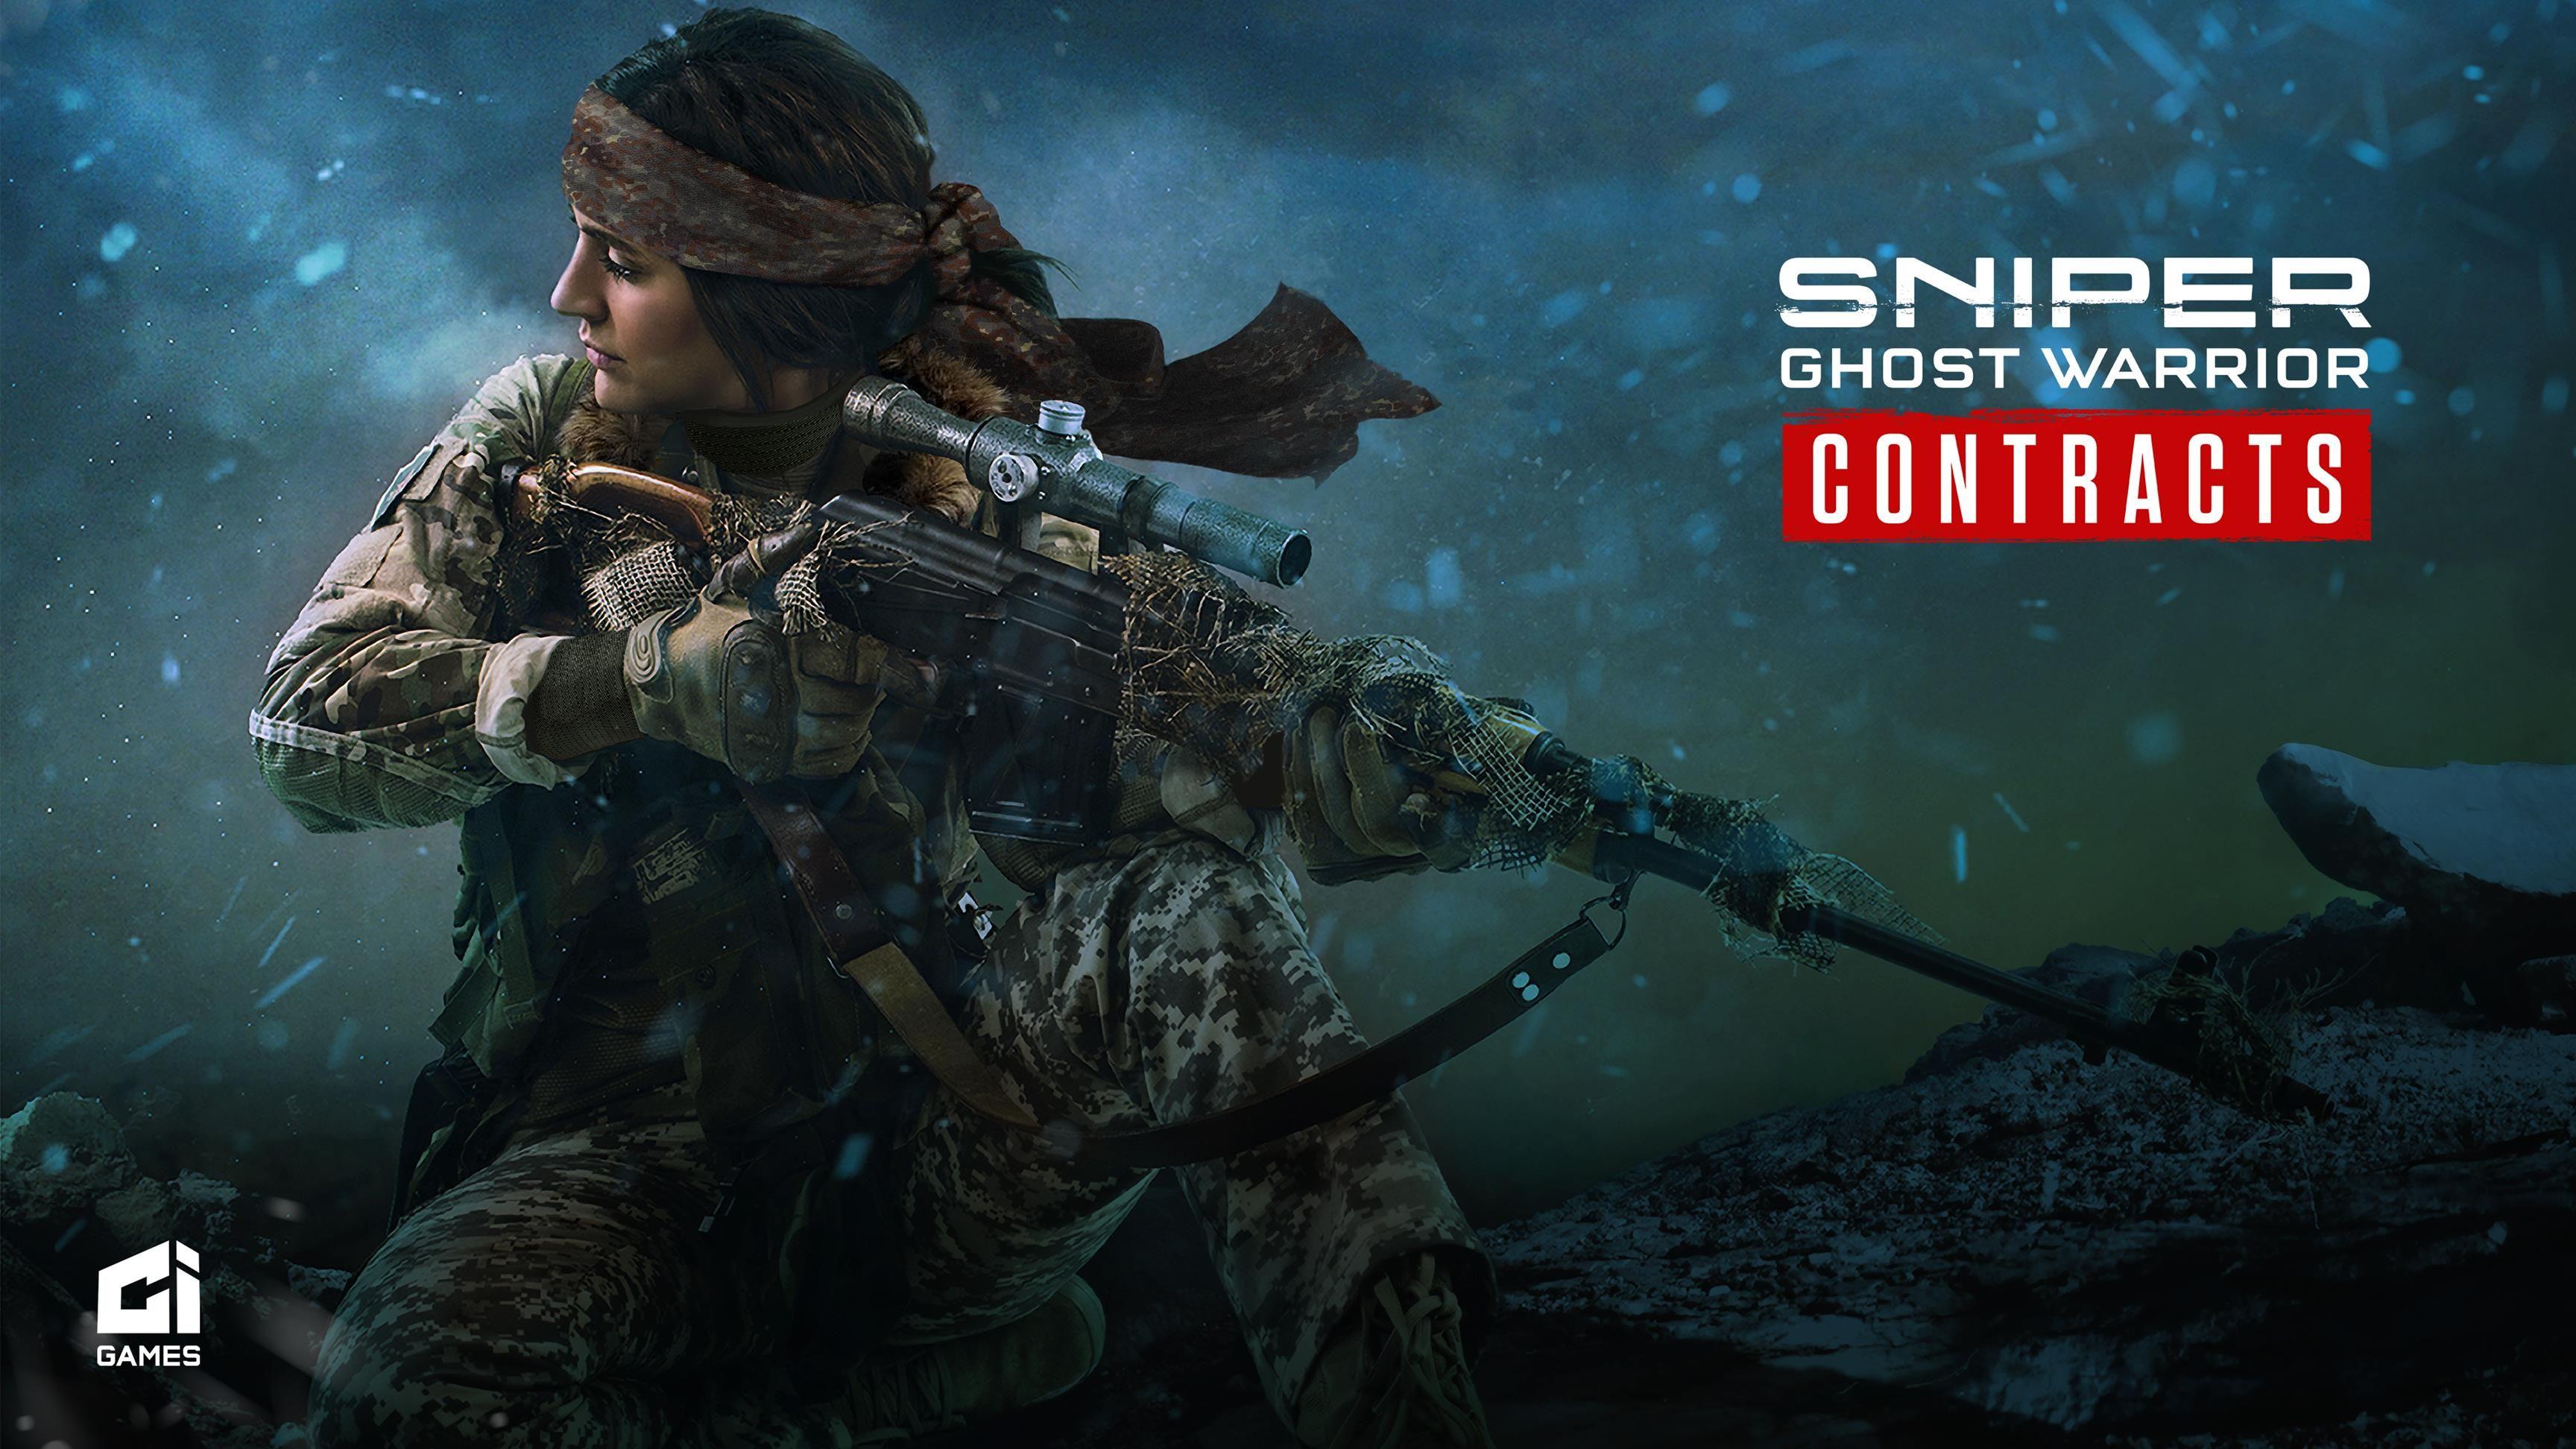 Sniper Ghost Warrior Contracts is the next game in